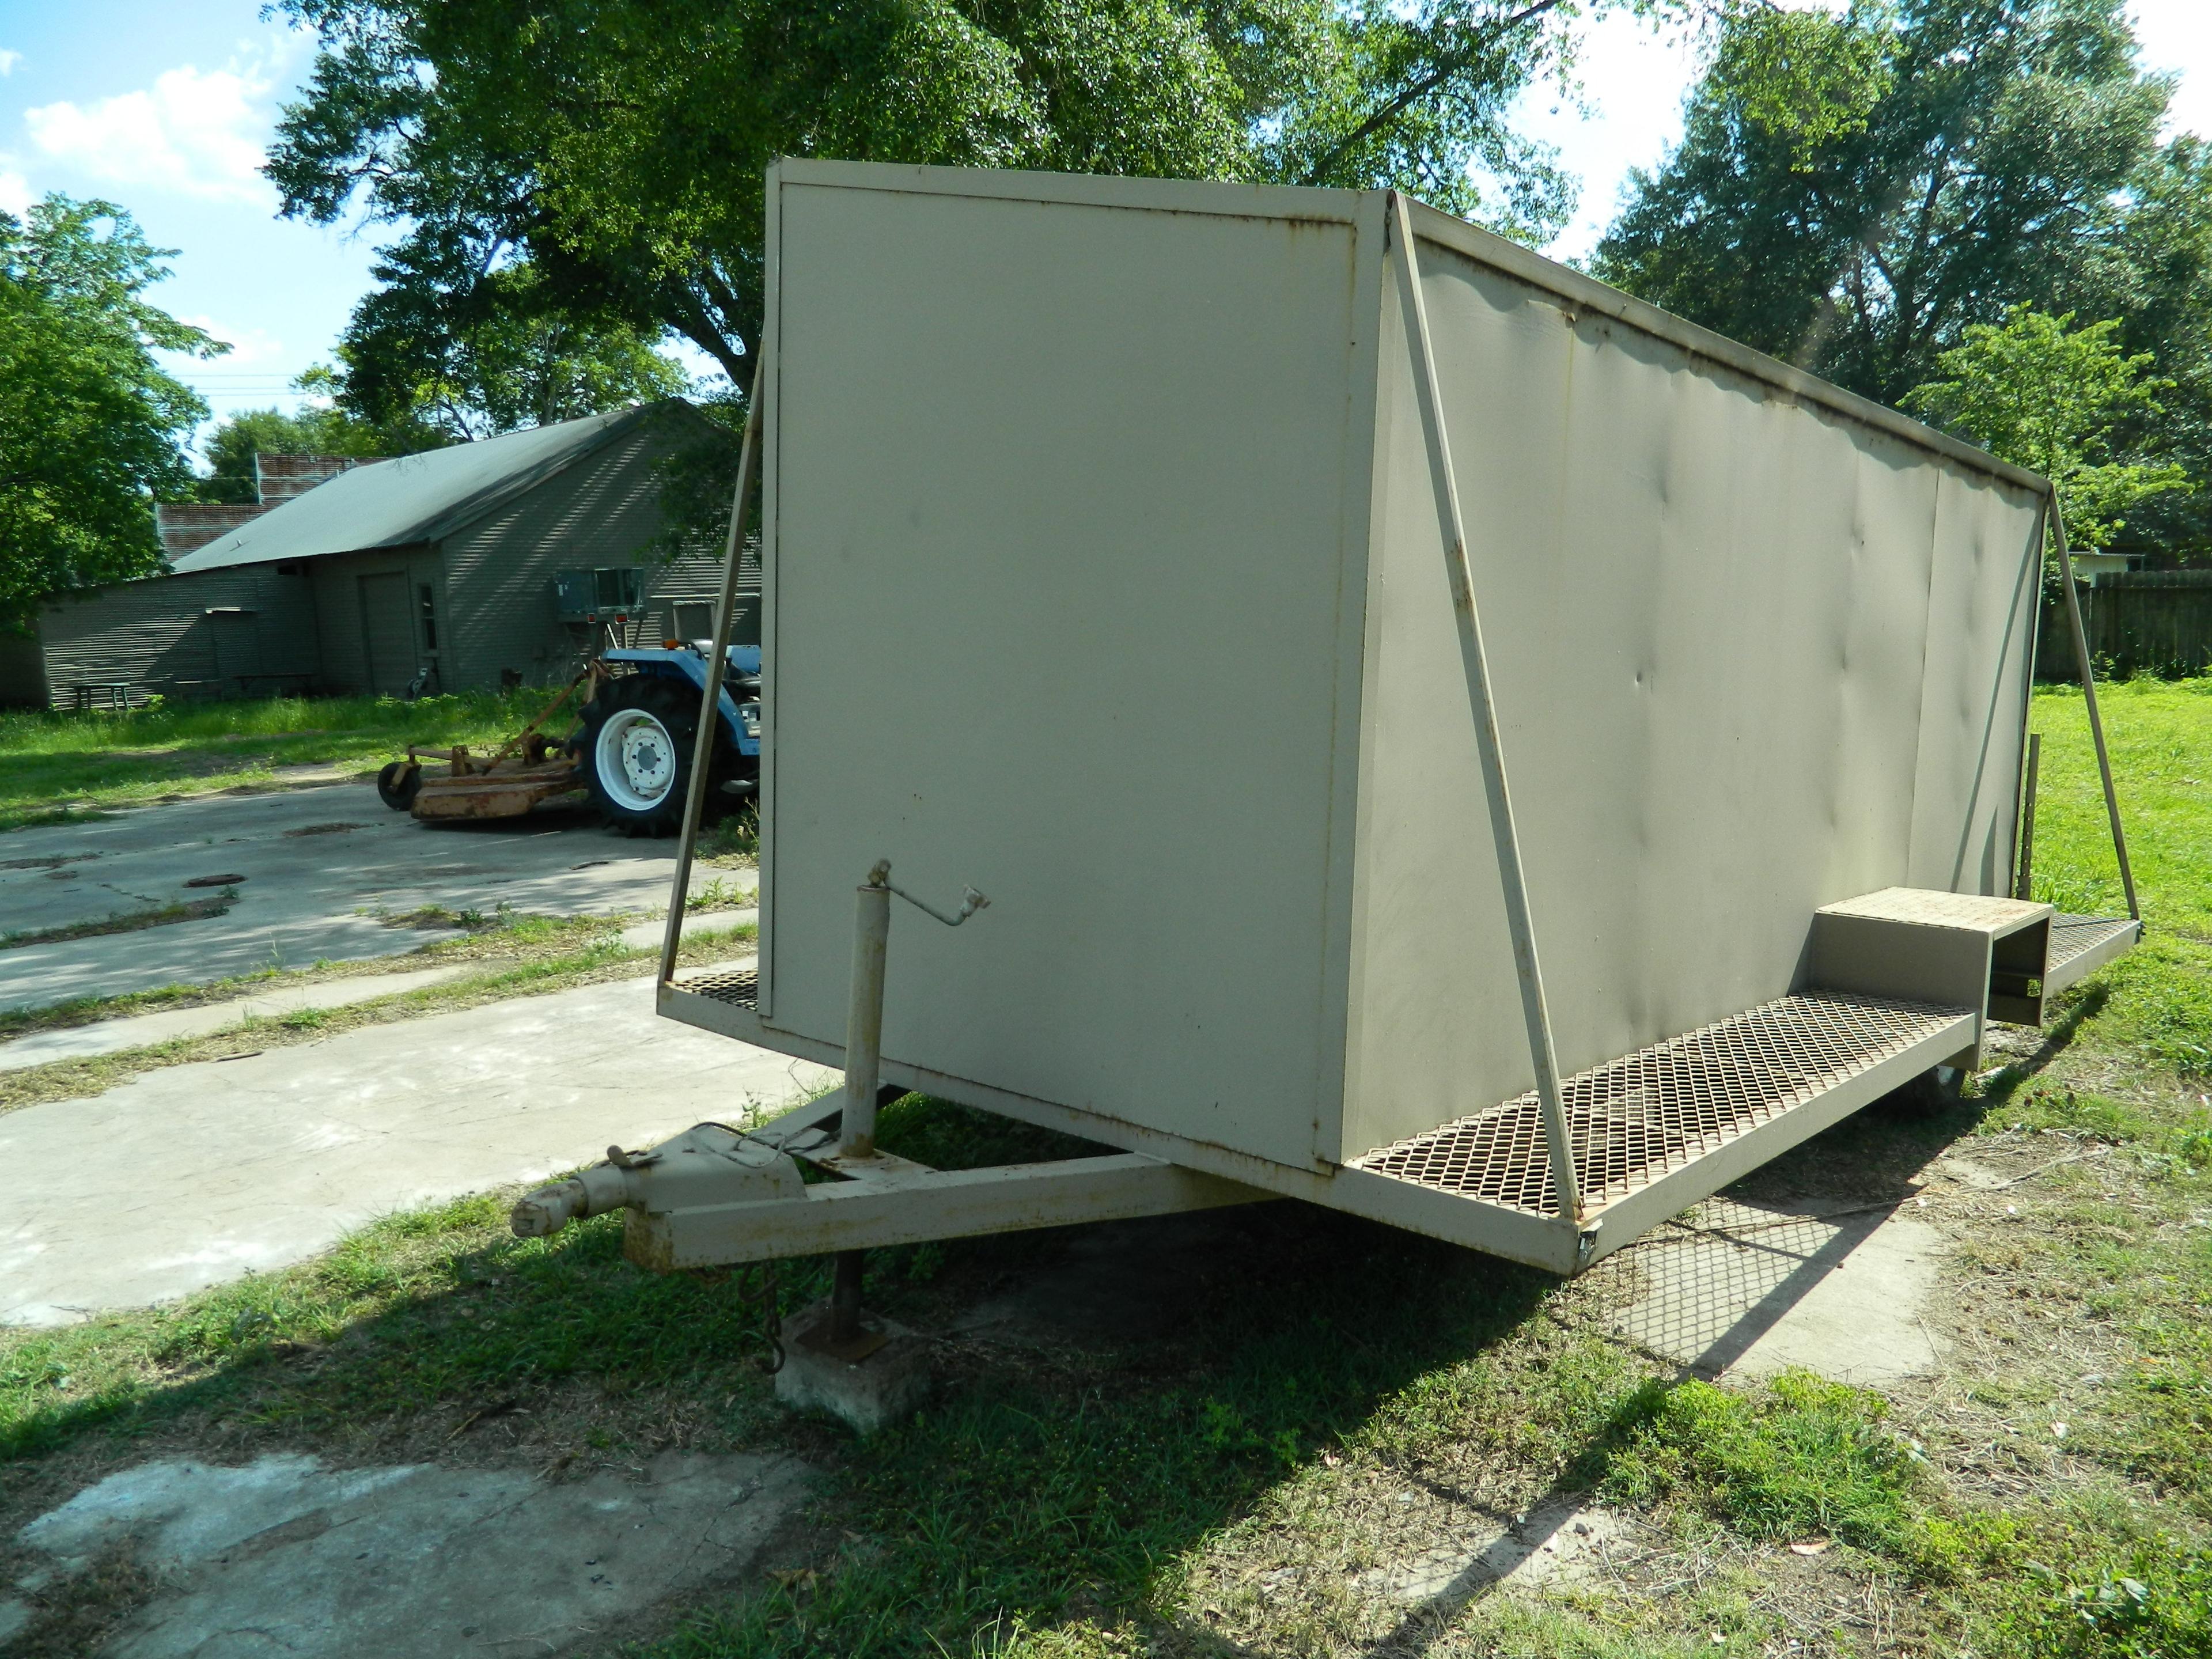 All Steel Recycle Trailer, small wheels, bumper pull, no title, shop made, bill of sale only.